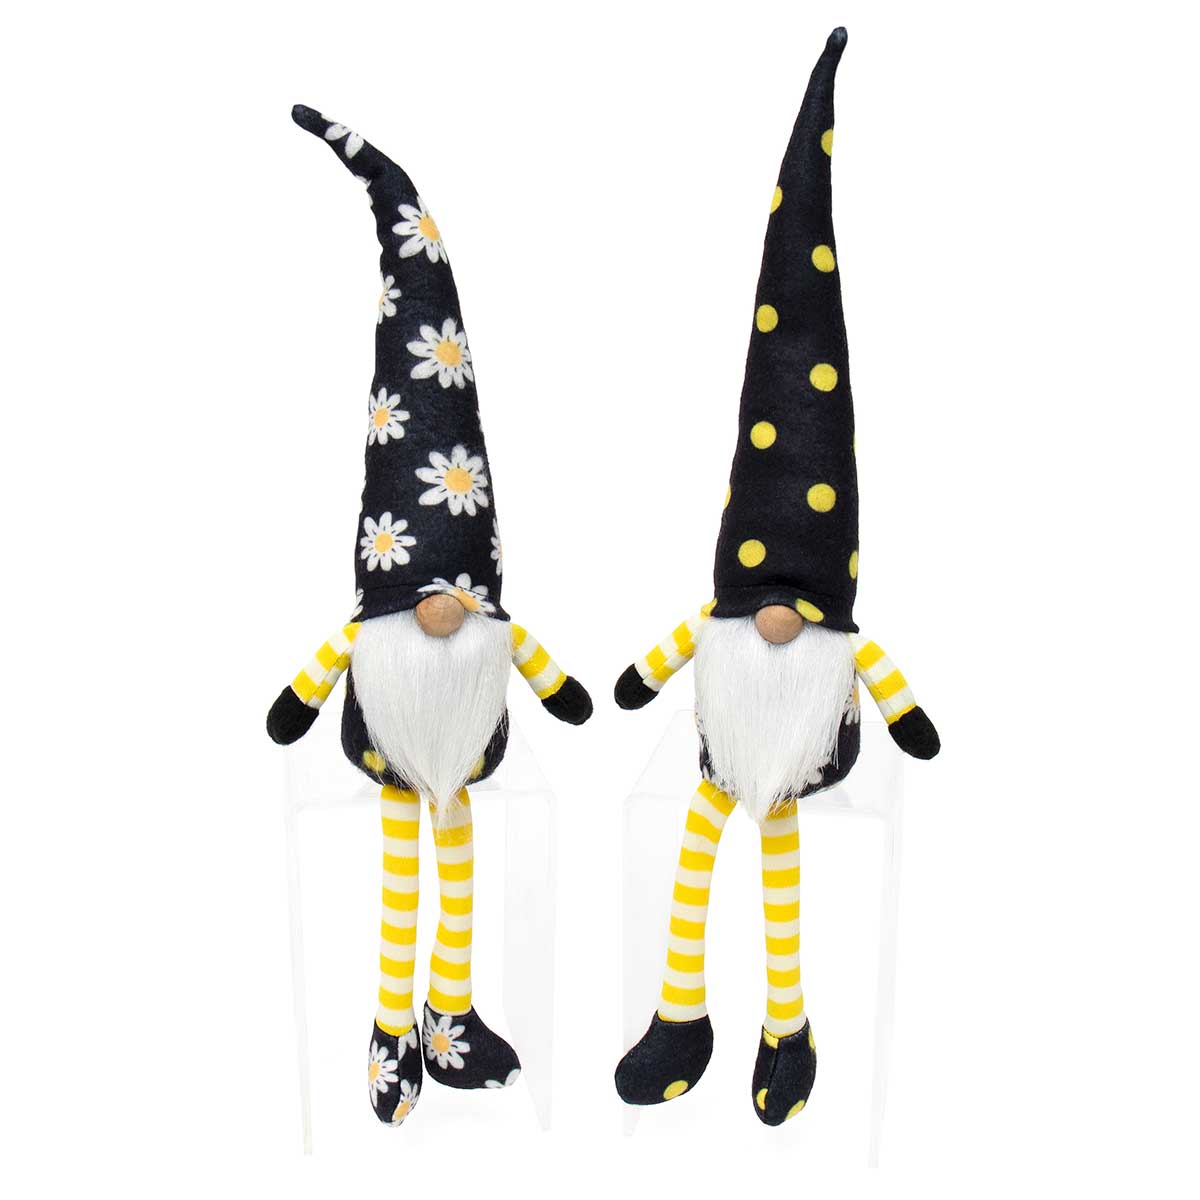 !Maisy and Daisy Gnome with Legs, Arms 16"